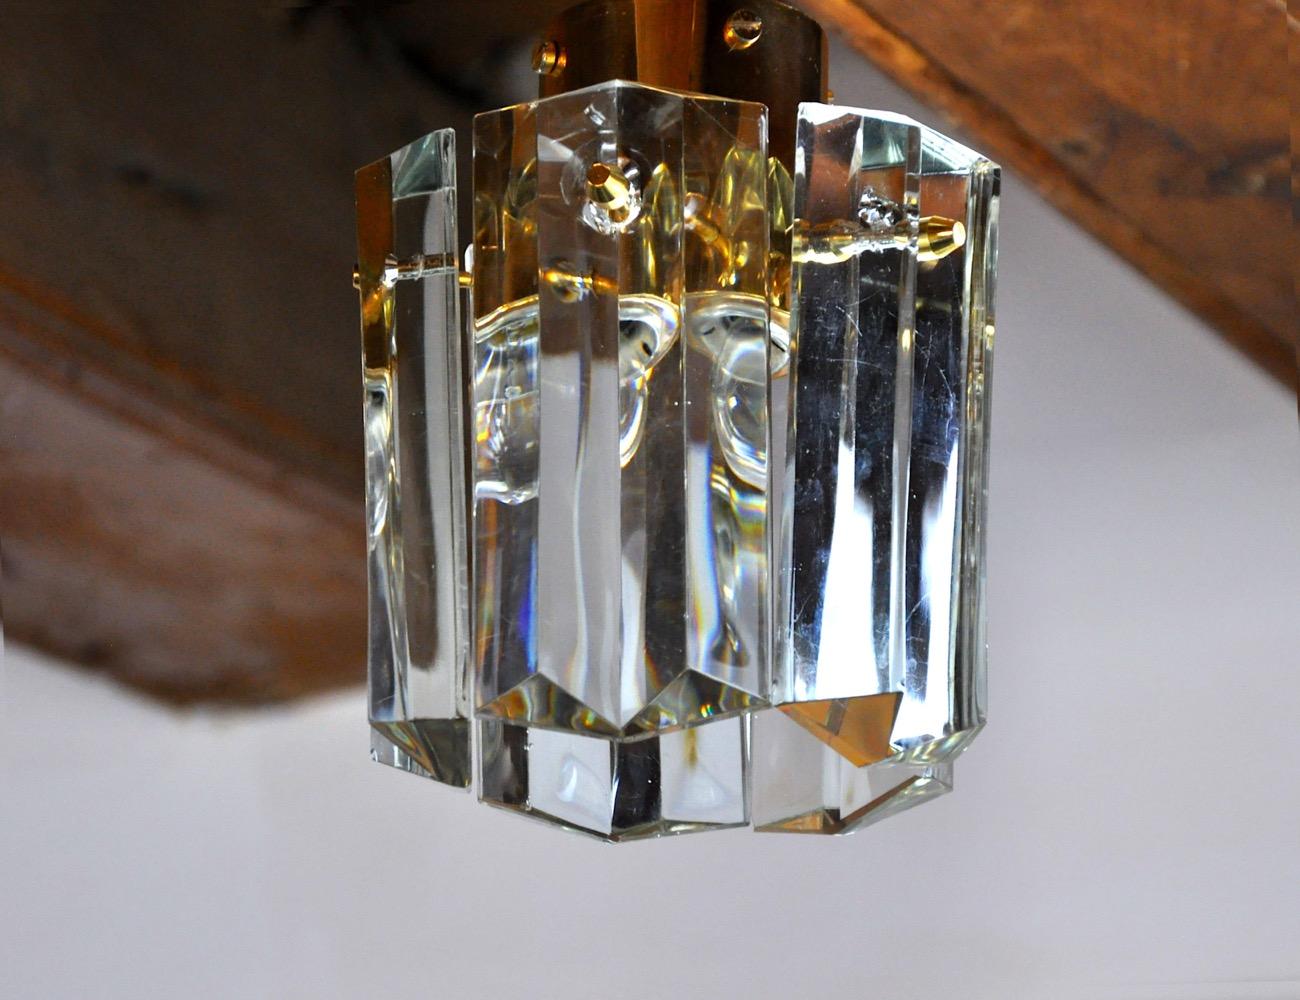 Very nice little kinkeldey ceiling light designed and produced in germany in the 70s, we have two units. Structure in gilded brass composed of cut crystals with marks of time consistent with its seniority. Rare design object that will illuminate